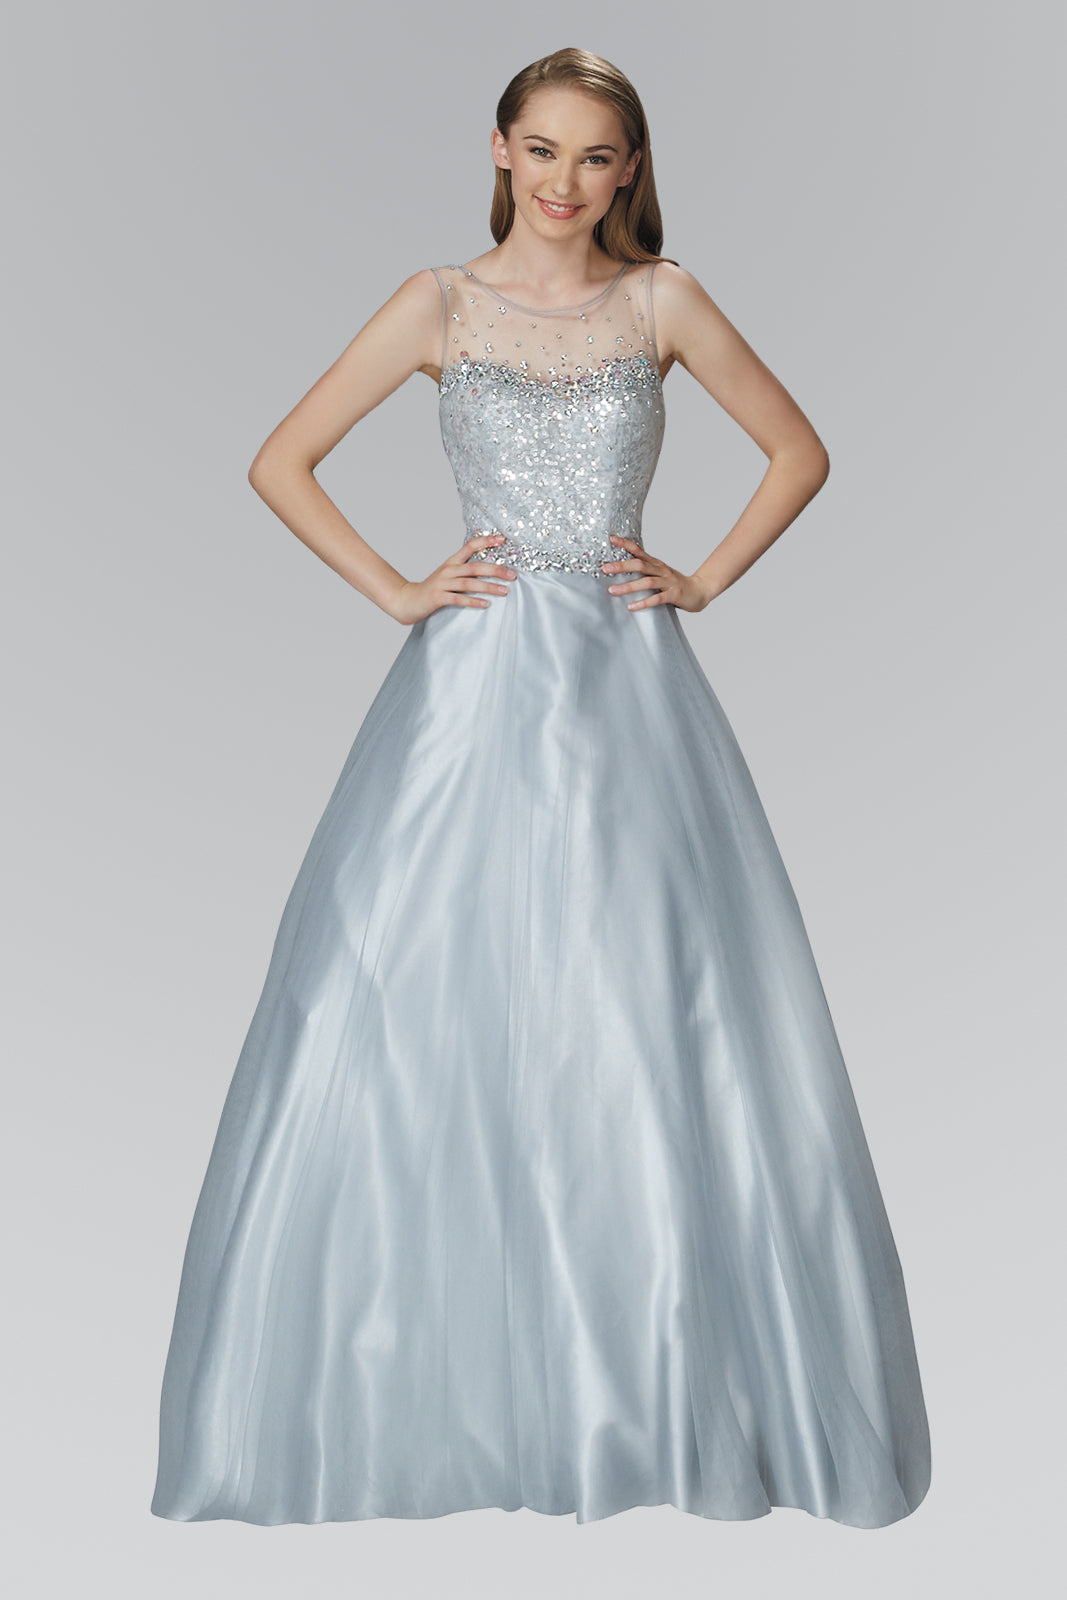 A-Line Long Dress with Sequin Embellished Sheer Bodice and back GLGL2111 Elsy Style PROM